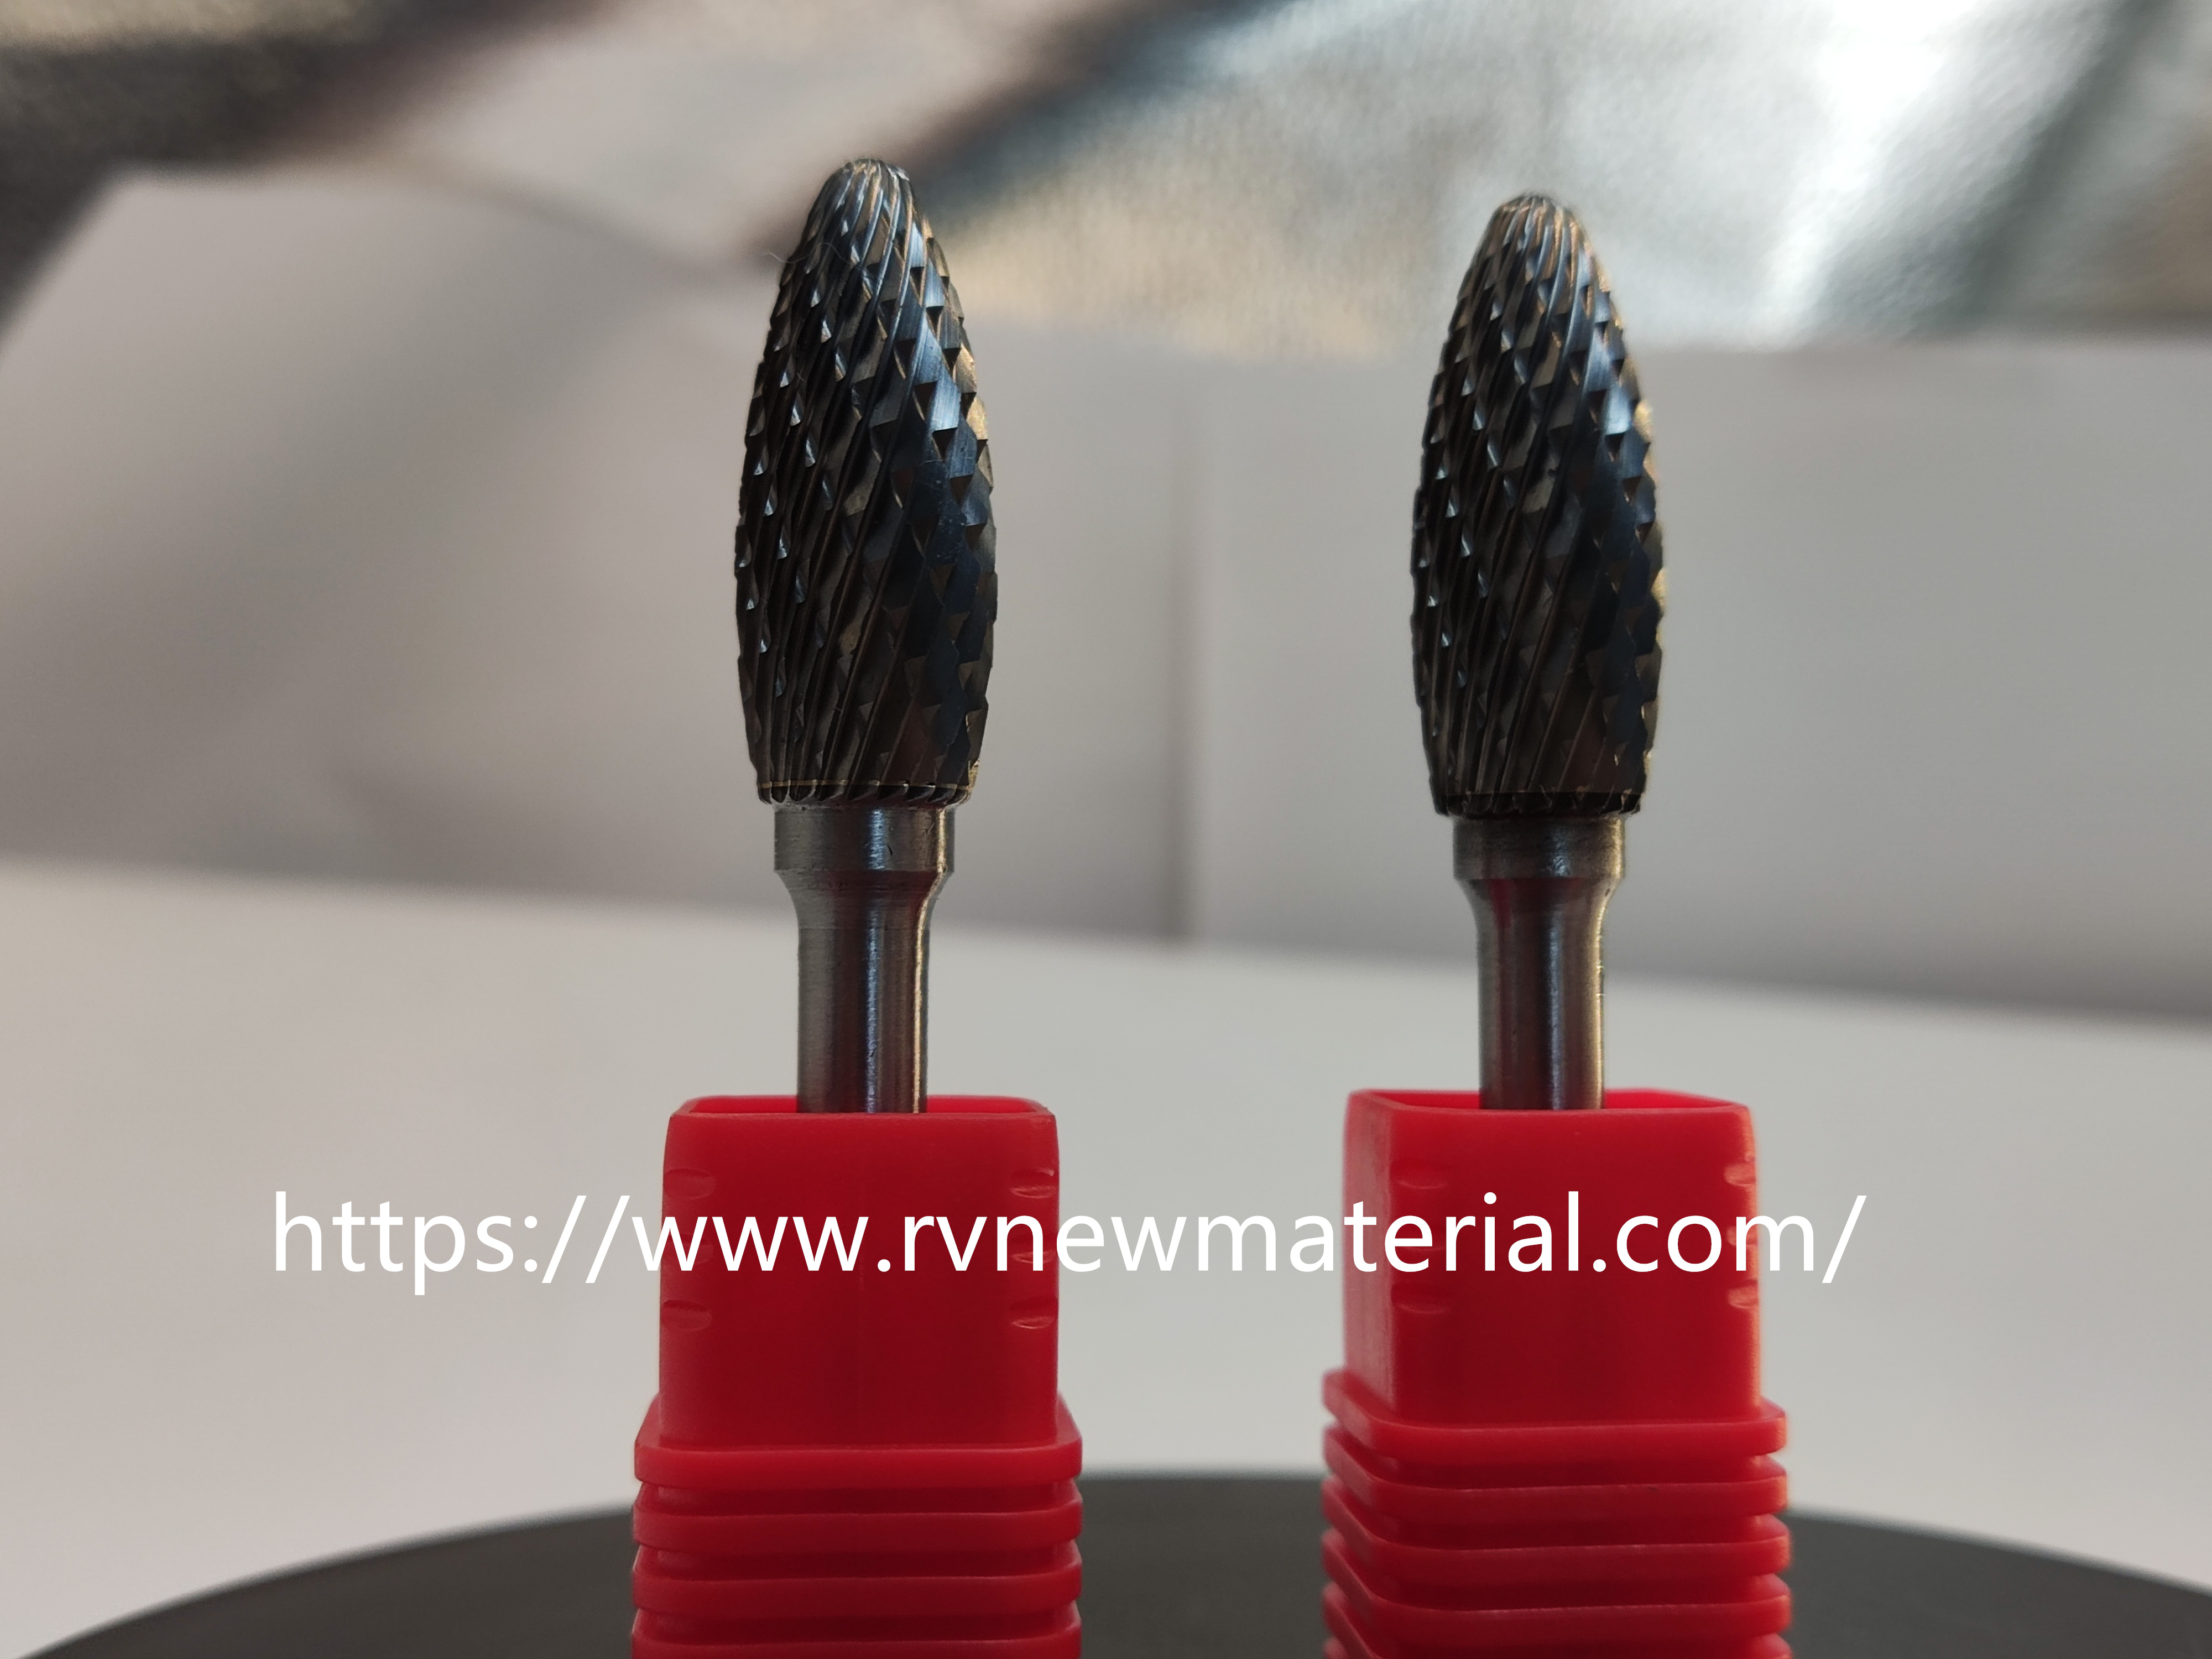 Carbide Rotary Burr Drill Bits for Wood Carving